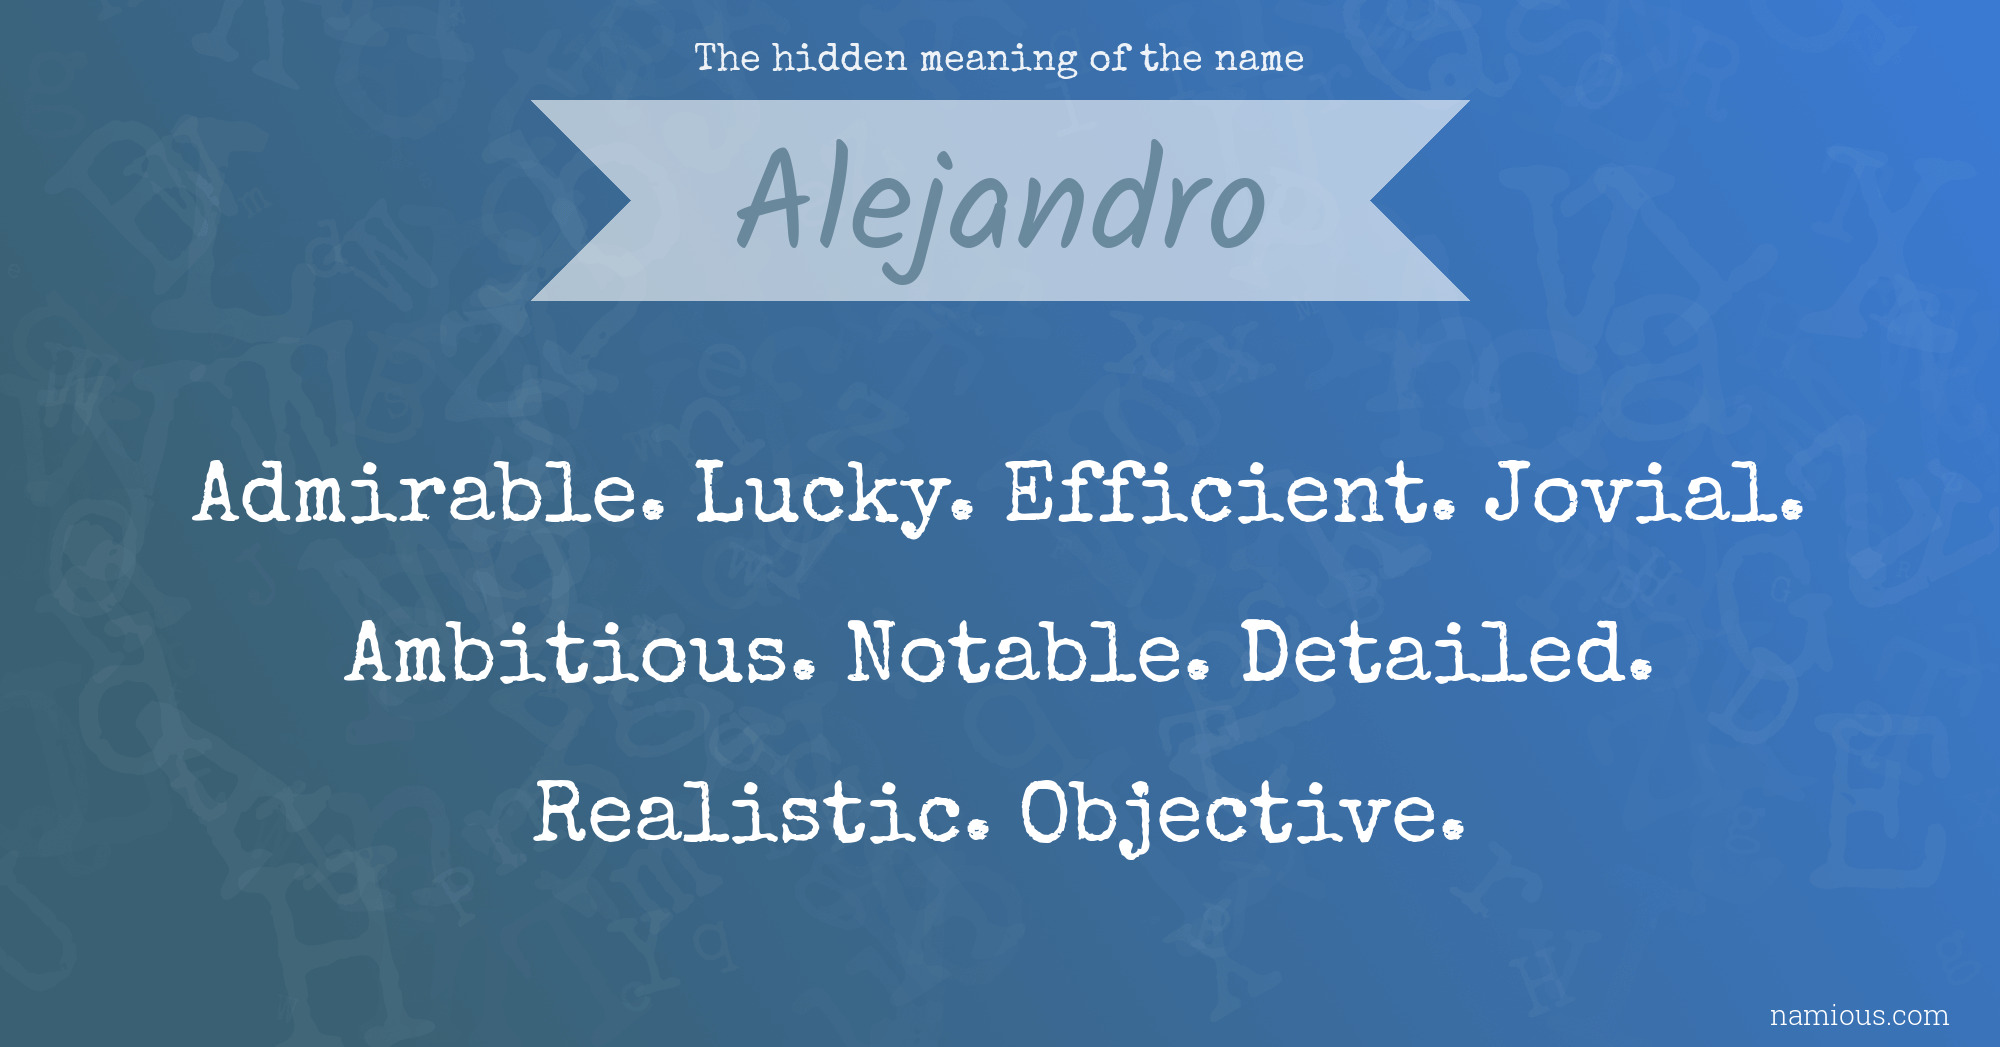 The hidden meaning of the name Alejandro